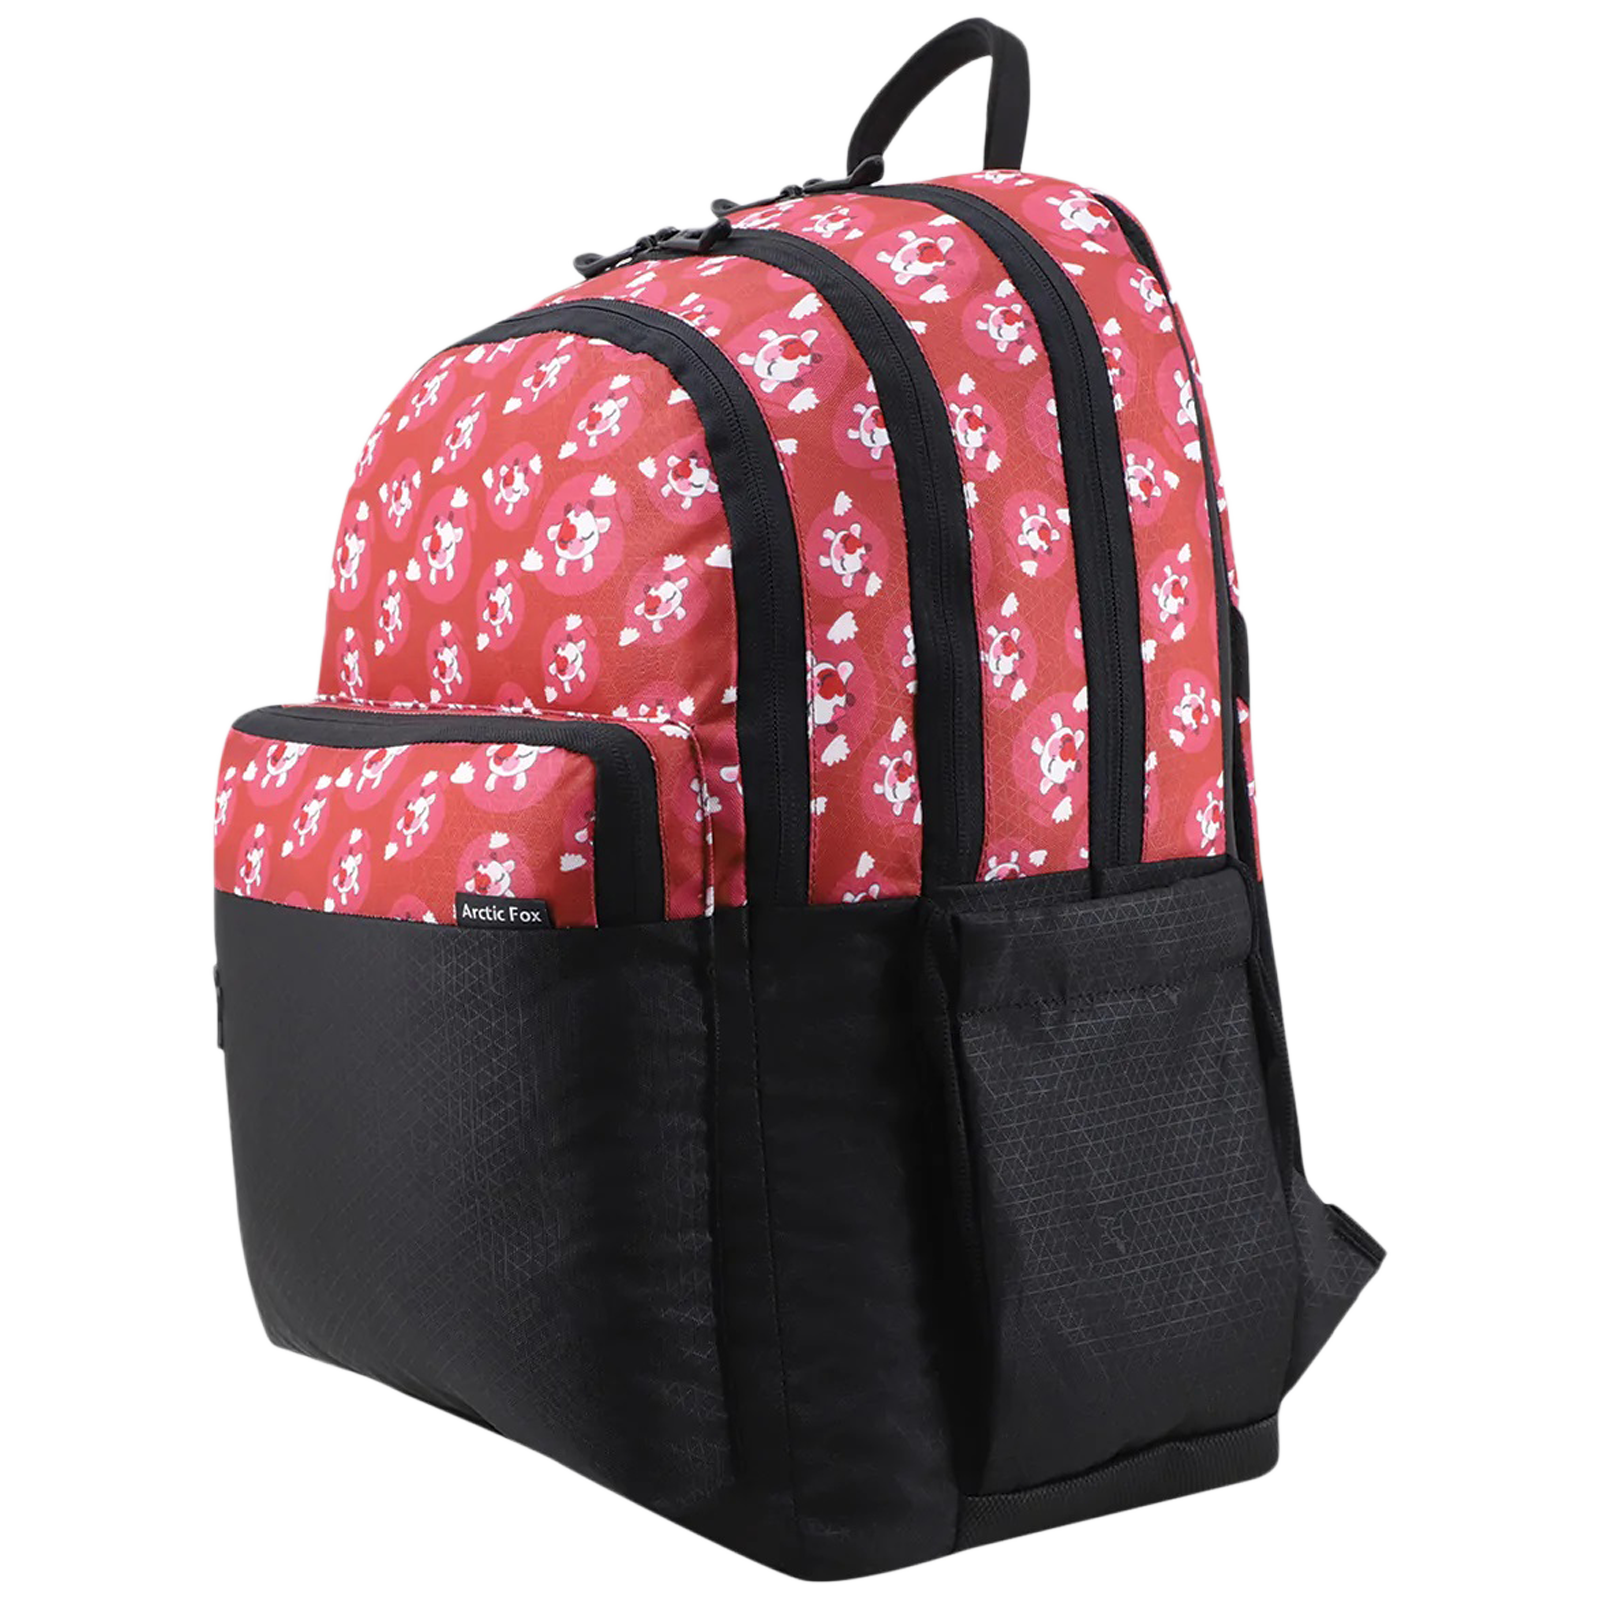 Arctic Fox Silly Calf Tawny Port 21 Litres Polyester Fabric and PU Coated Backpack (Webbing Handle, FJUBPKTPOWW098021, Red)_4